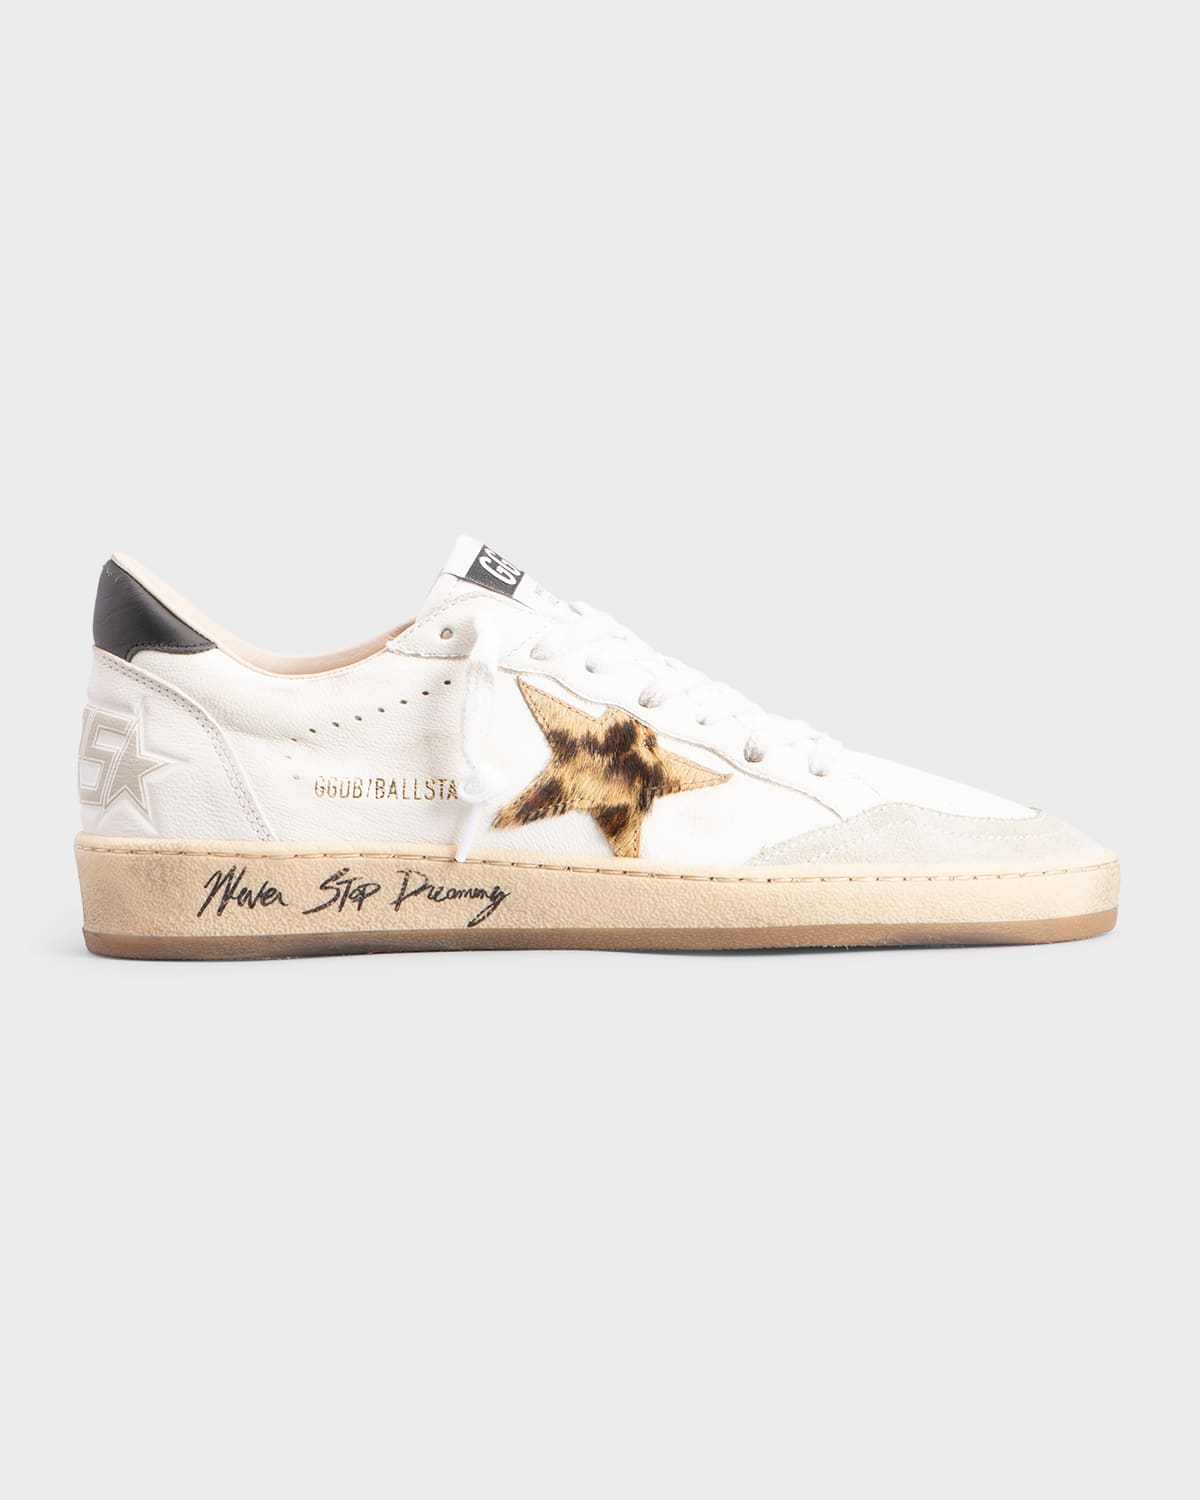 GOLDEN GOOSE BALLSTAR MIXED LEATHER LOW-TOP SNEAKERS